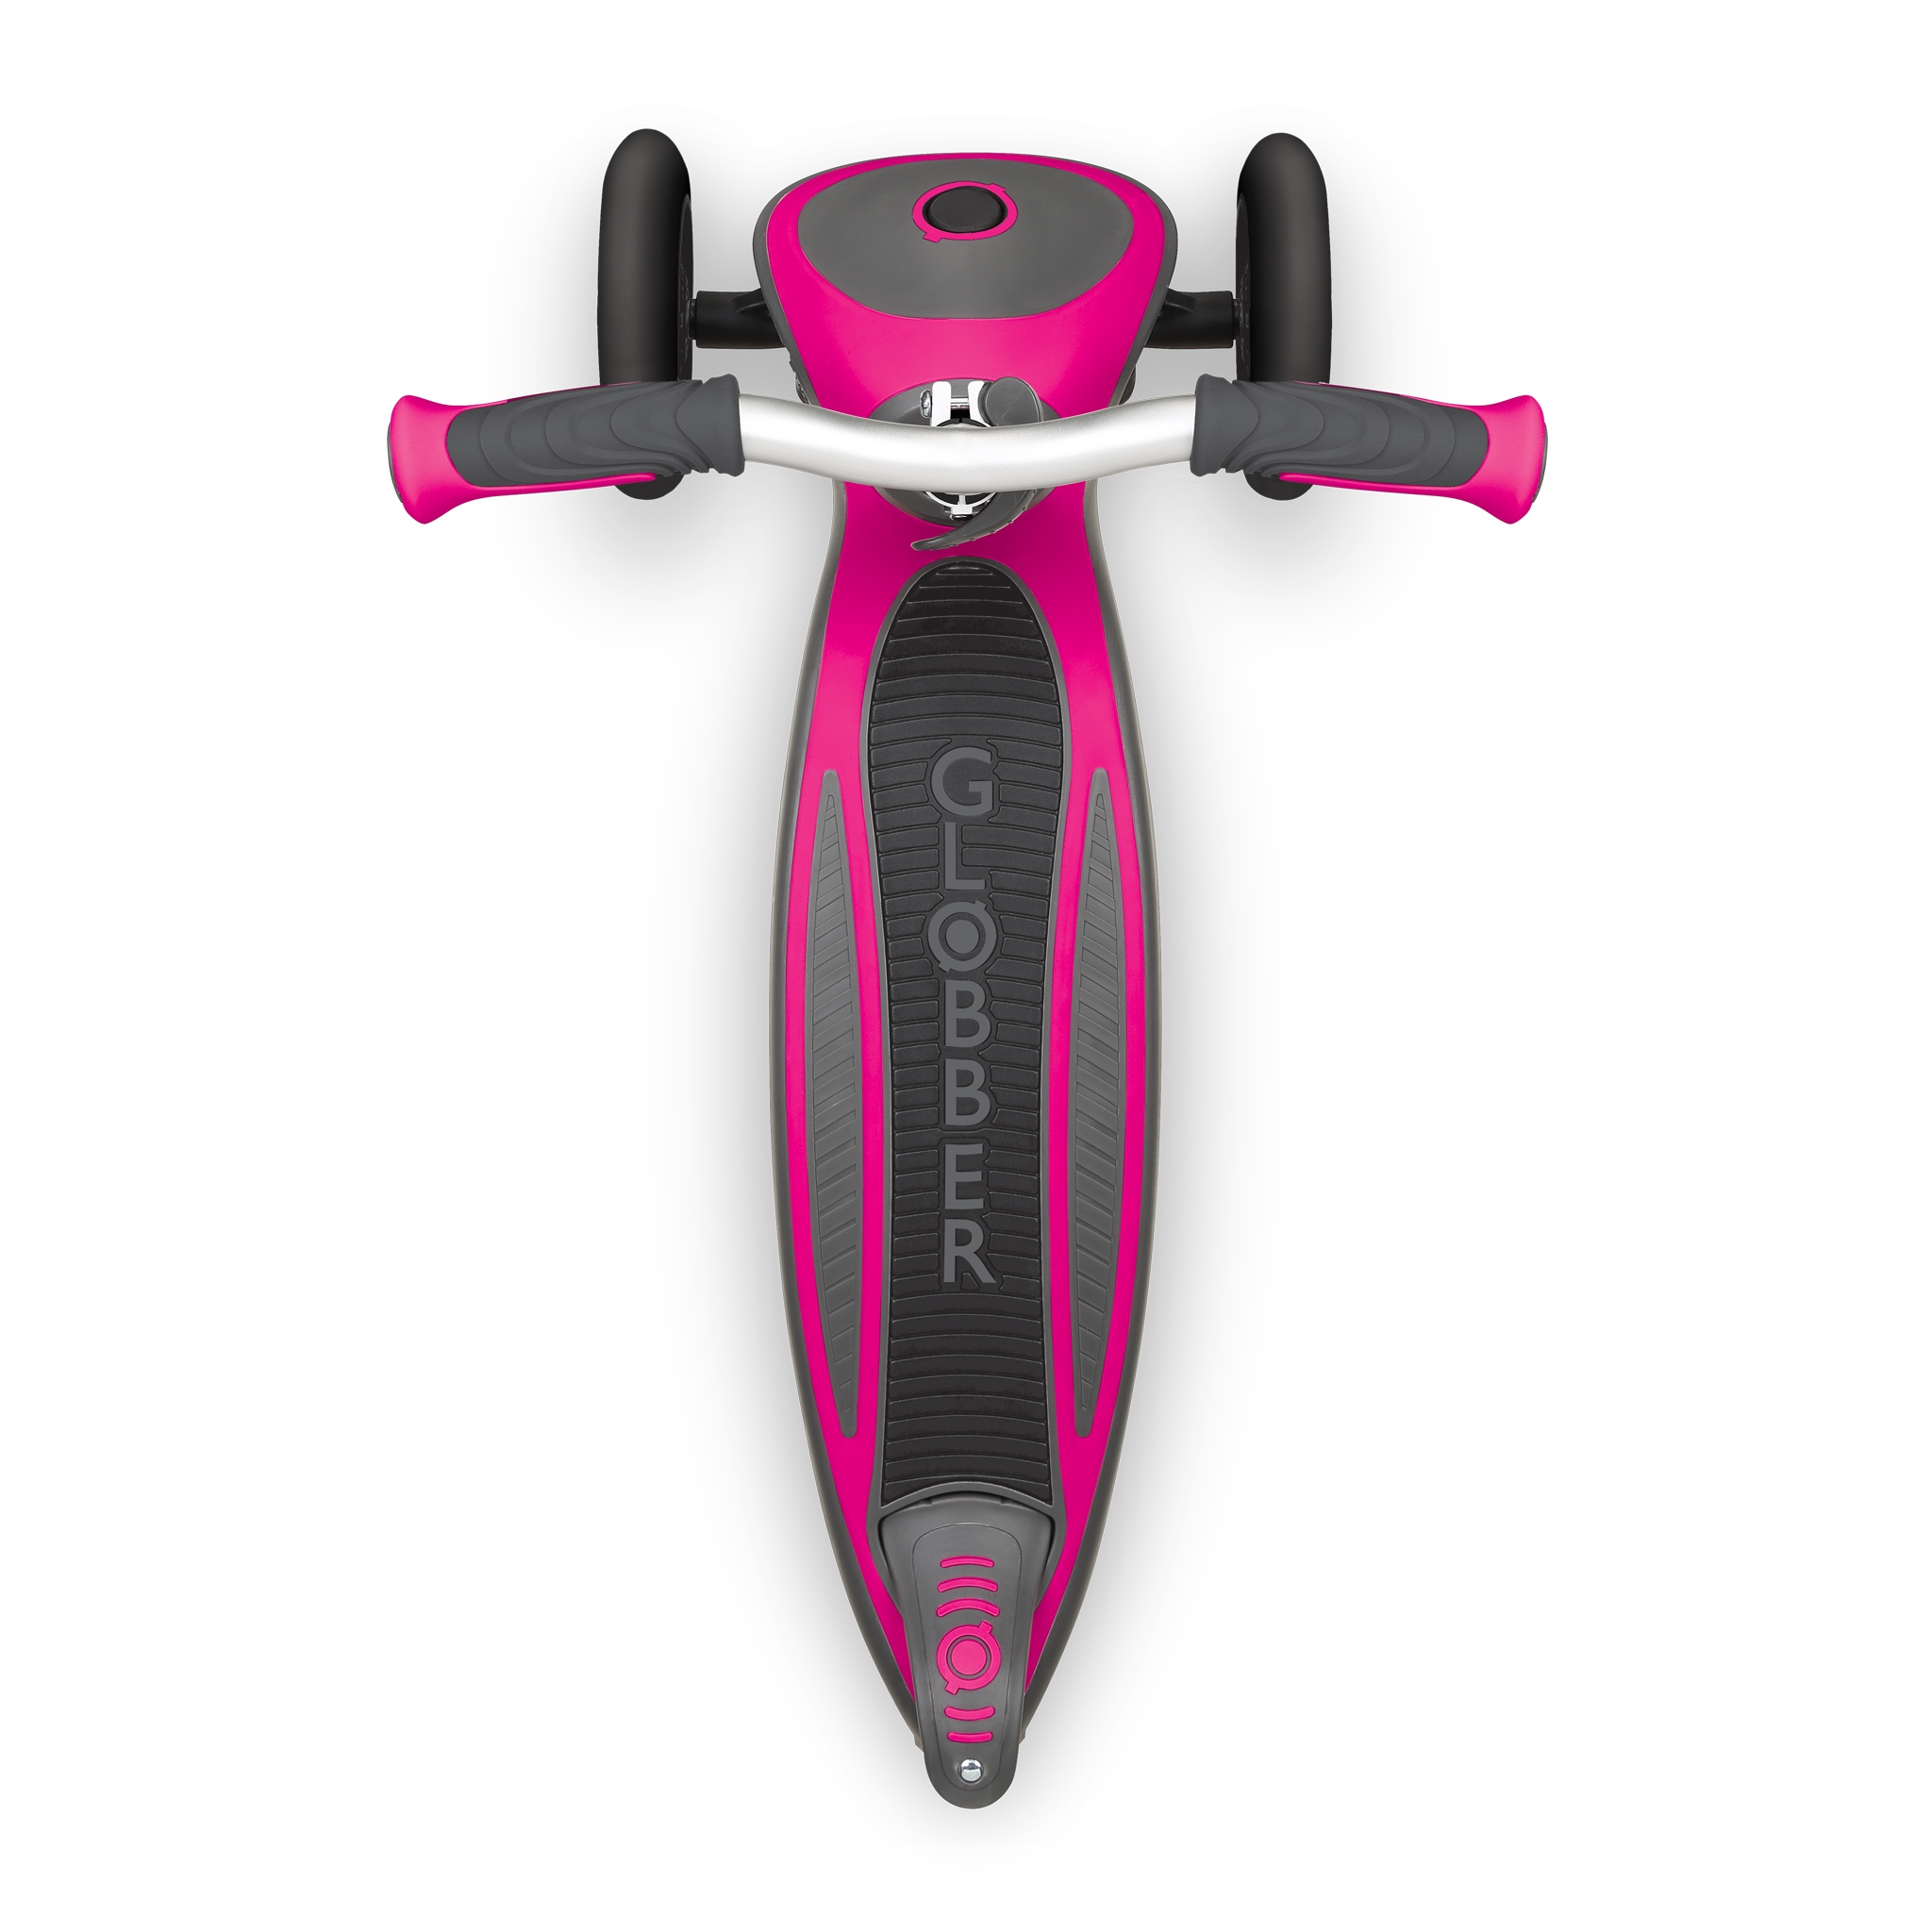 Globber-MASTER-3-wheel-foldable-scooter-for-kids-with-extra-wide-anti-slip-deck-for-comfortable-rides_deep-pink 0